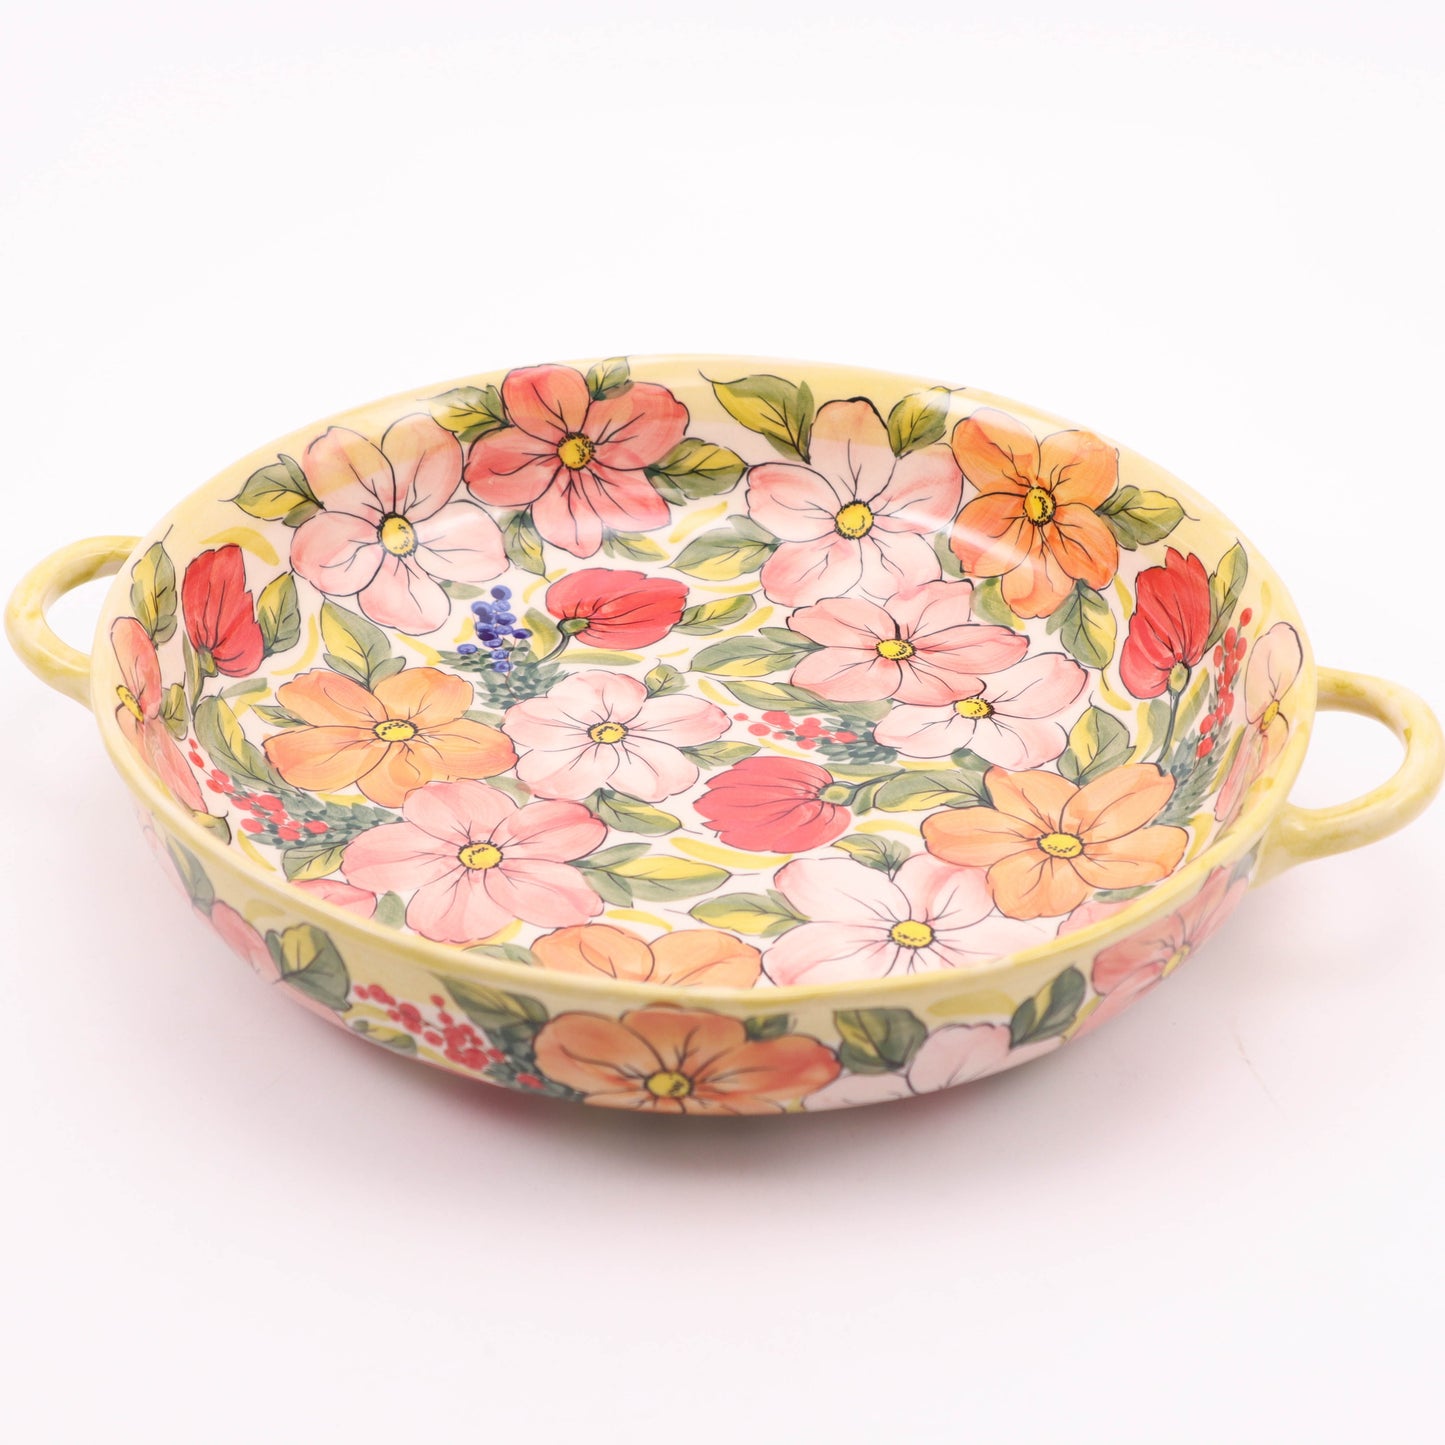 10.5" Round Baker With Handles Pattern: A38